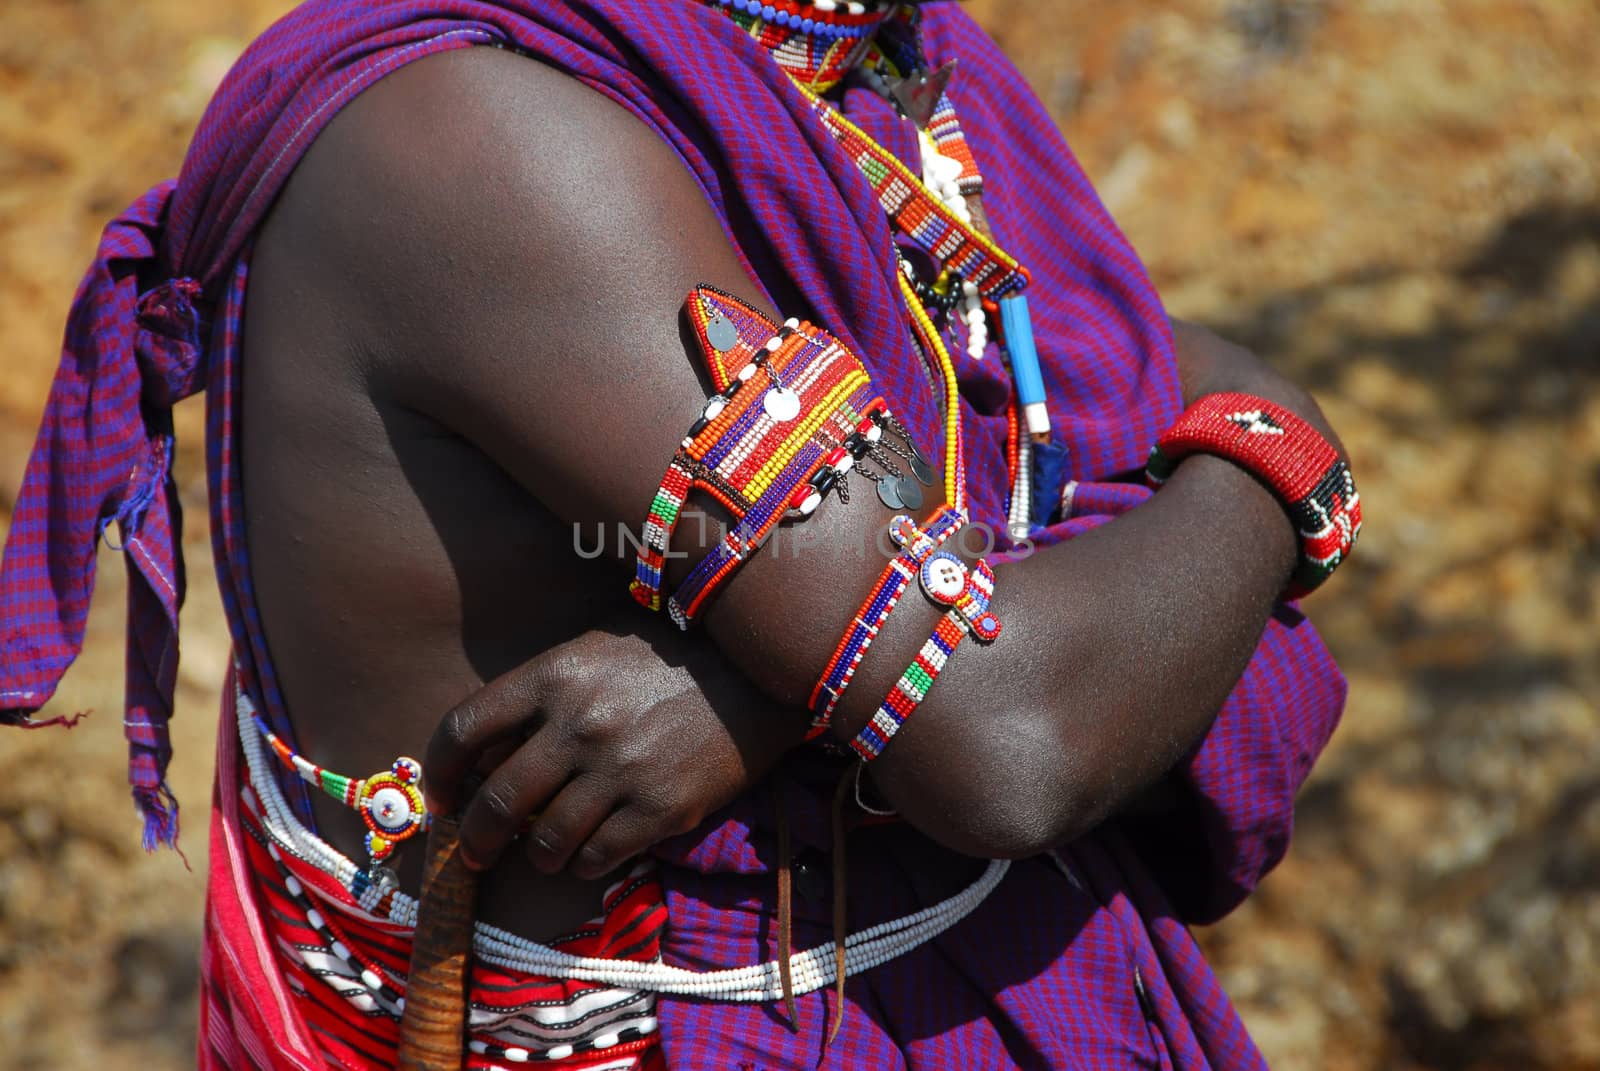 Masai jewelry with typical